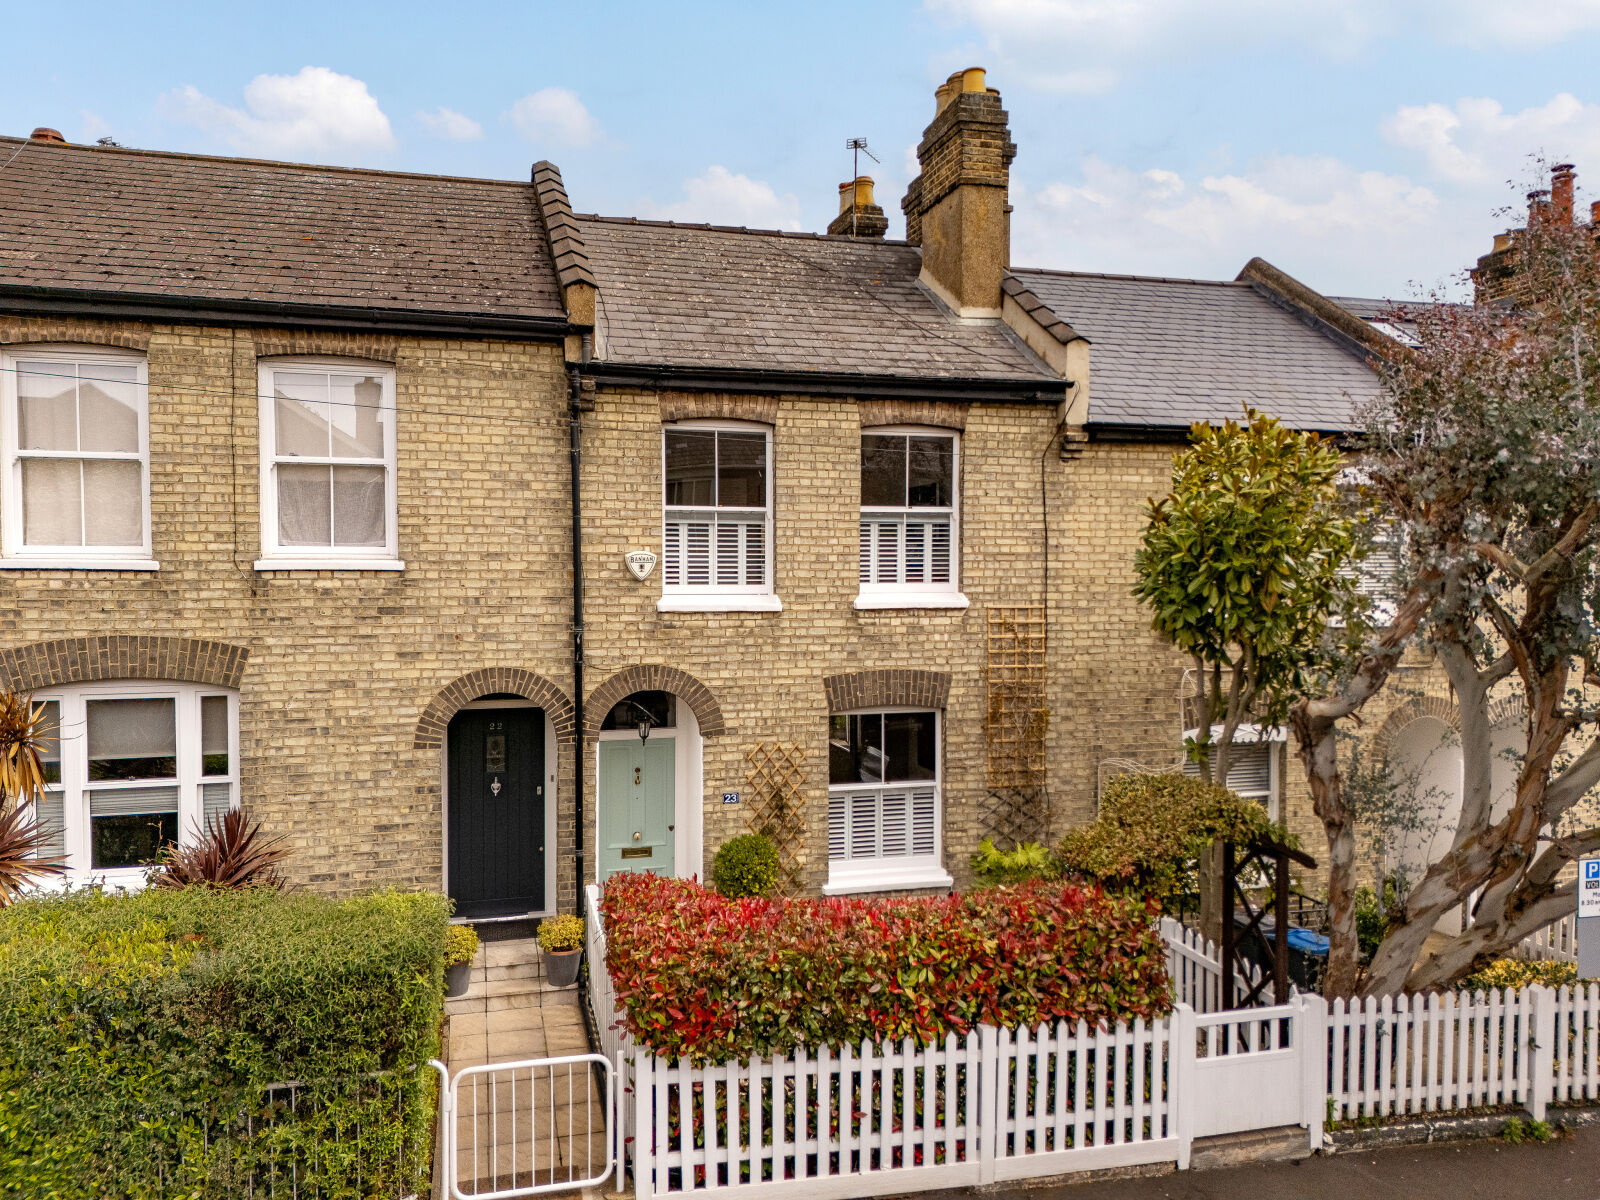 2 bedroom mid terraced house for sale Thornton Road, Wimbledon, SW19, main image